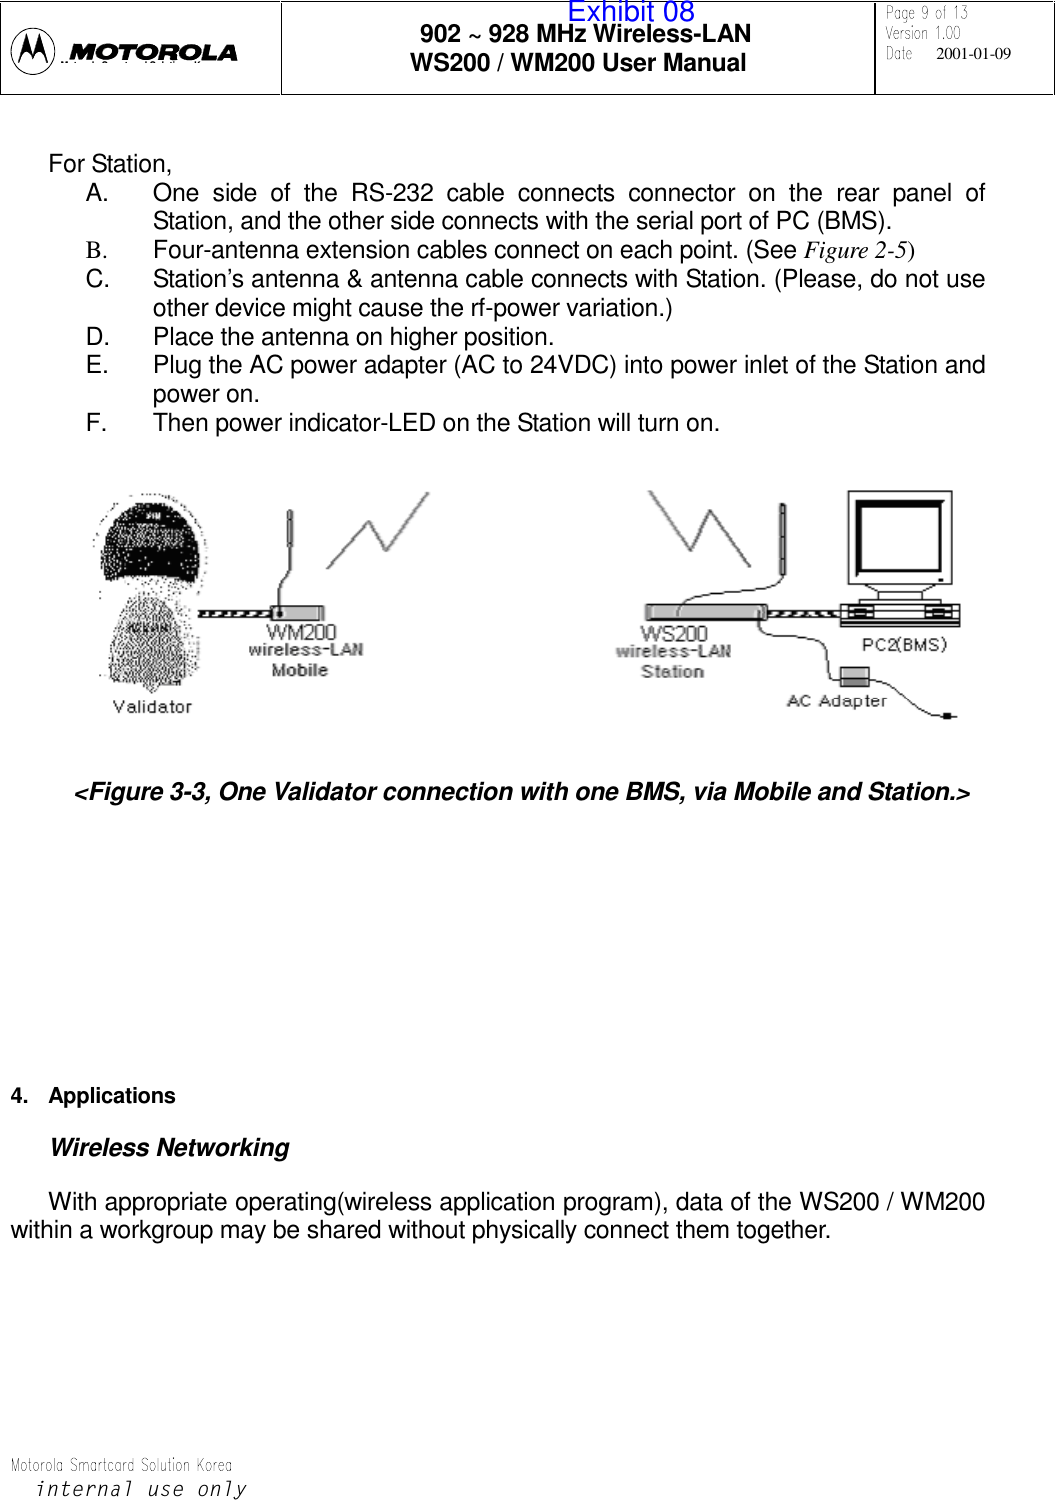 902 ~ 928 MHz Wireless-LANWS200 / WM200 User Manual 2001-01-09LQWHUQDOXVHRQO\Mt l S t dSlti KFor Station,A.  One side of the RS-232 cable connects connector on the rear panel ofStation, and the other side connects with the serial port of PC (BMS).B.  Four-antenna extension cables connect on each point. (See Figure 2-5)C.  Station’s antenna &amp; antenna cable connects with Station. (Please, do not useother device might cause the rf-power variation.)D.  Place the antenna on higher position.E.  Plug the AC power adapter (AC to 24VDC) into power inlet of the Station andpower on.F.  Then power indicator-LED on the Station will turn on.&lt;Figure 3-3, One Validator connection with one BMS, via Mobile and Station.&gt;4. ApplicationsWireless NetworkingWith appropriate operating(wireless application program), data of the WS200 / WM200within a workgroup may be shared without physically connect them together.Exhibit 08